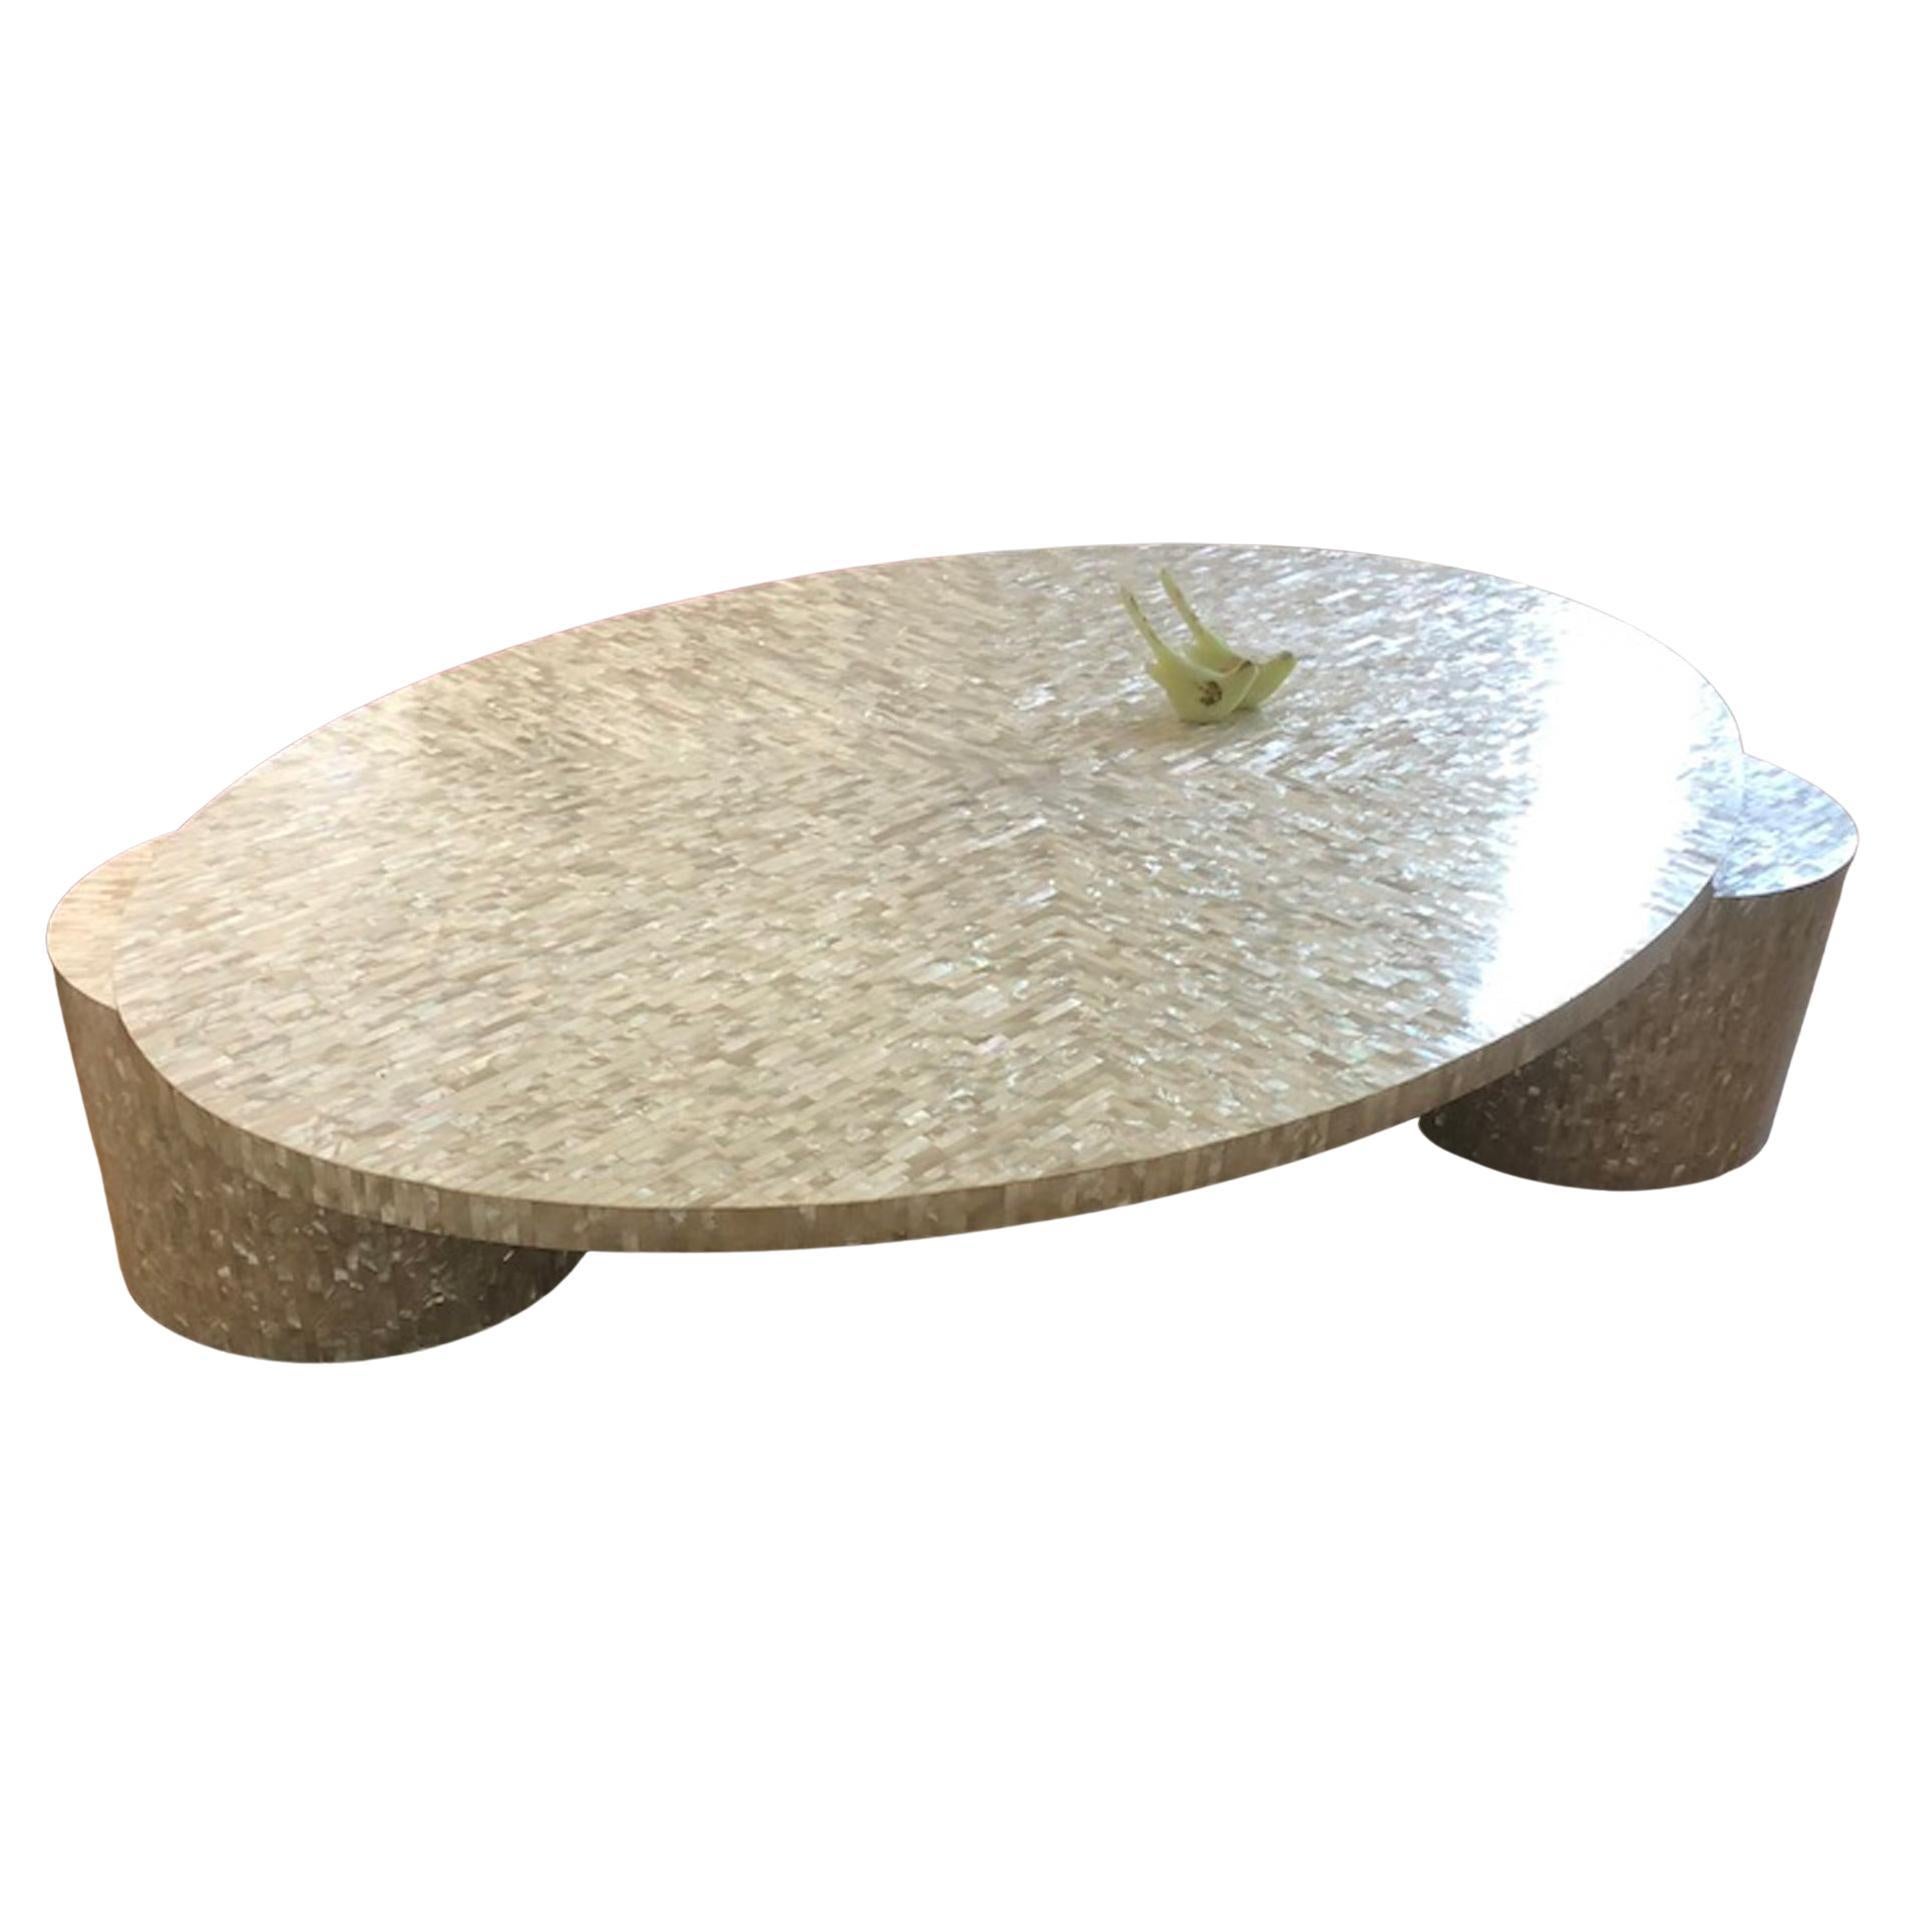 Splendid unique Memphis style mother of pearl coffee table For Sale